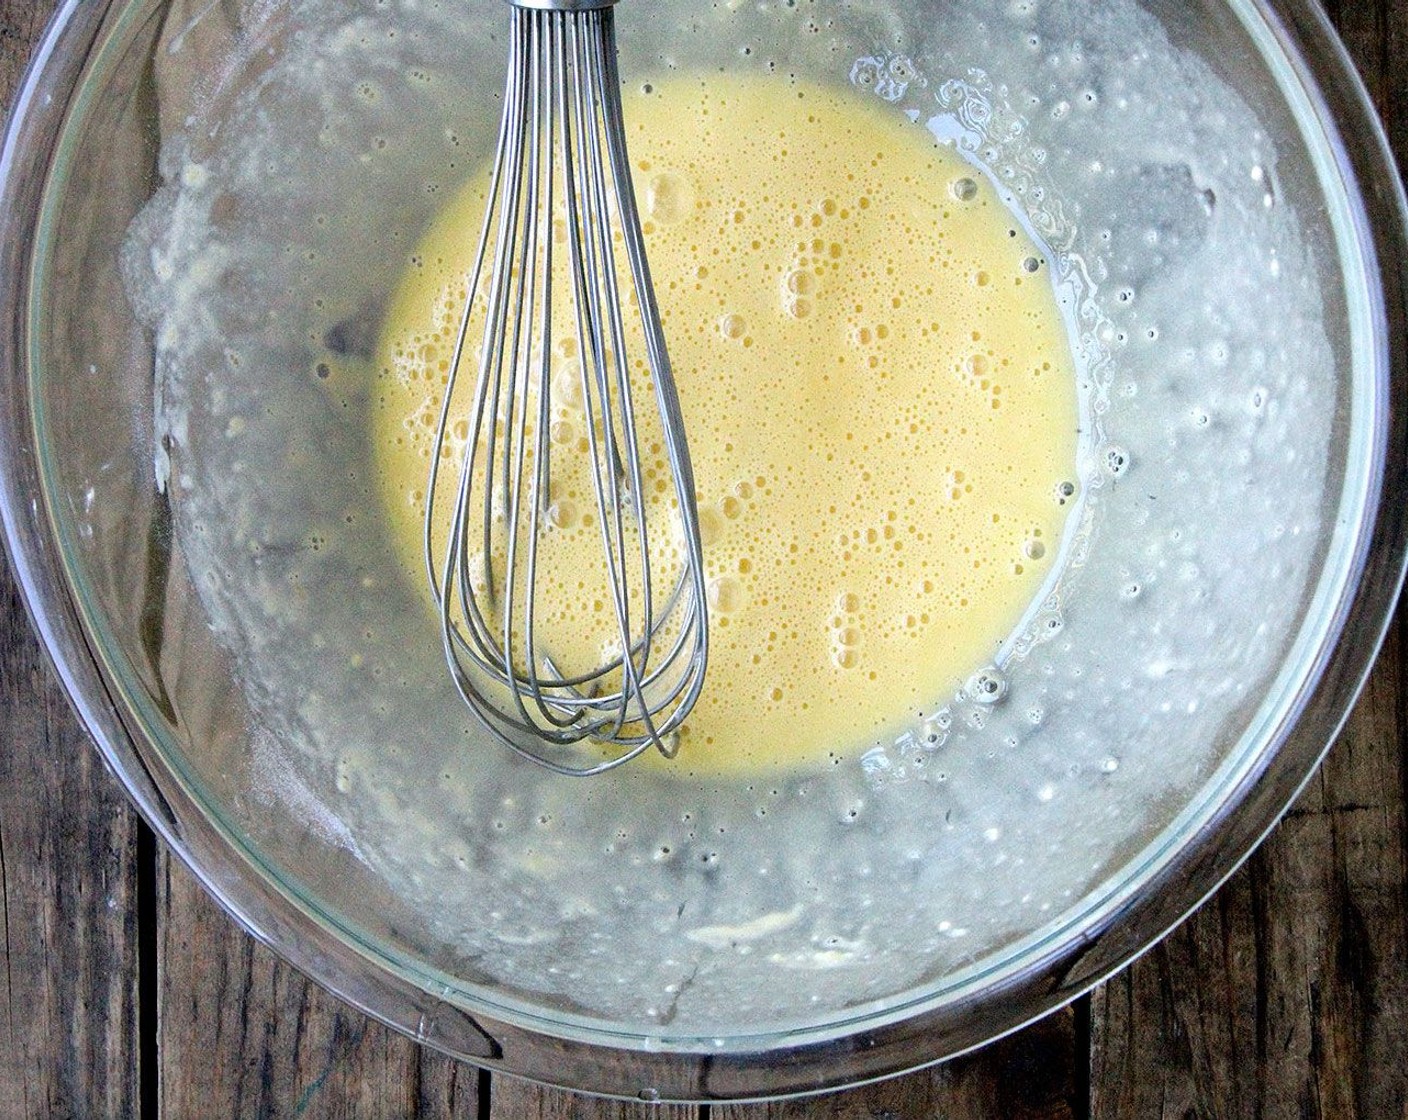 step 7 Whisk in the remaining Farmhouse Eggs® Large Brown Eggs (4) untl blended.